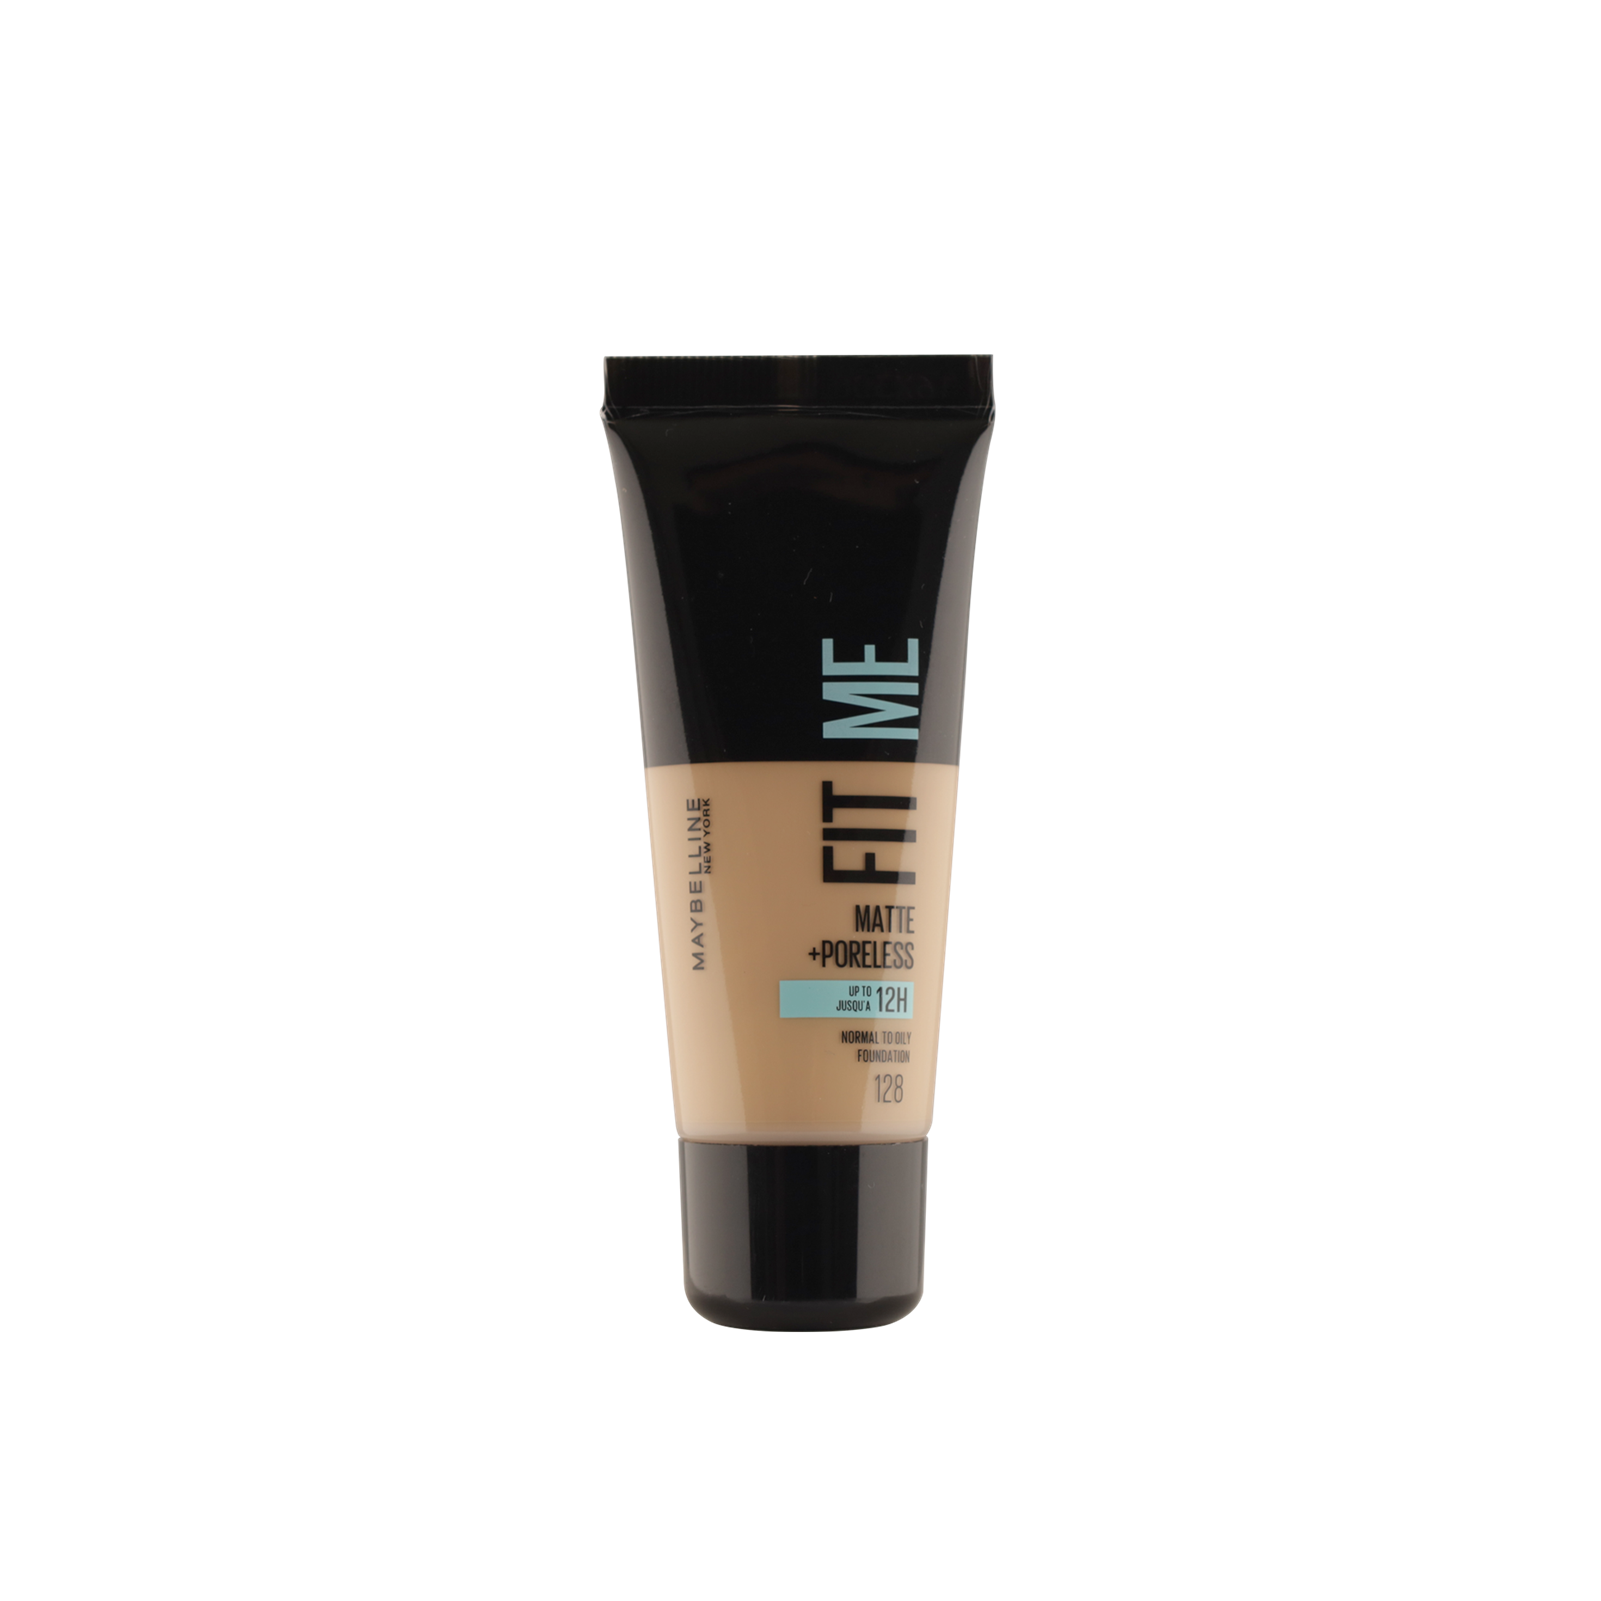 Maybelline fitme matte+poreless with clay foundation shade 128warm nude for  flawless face base